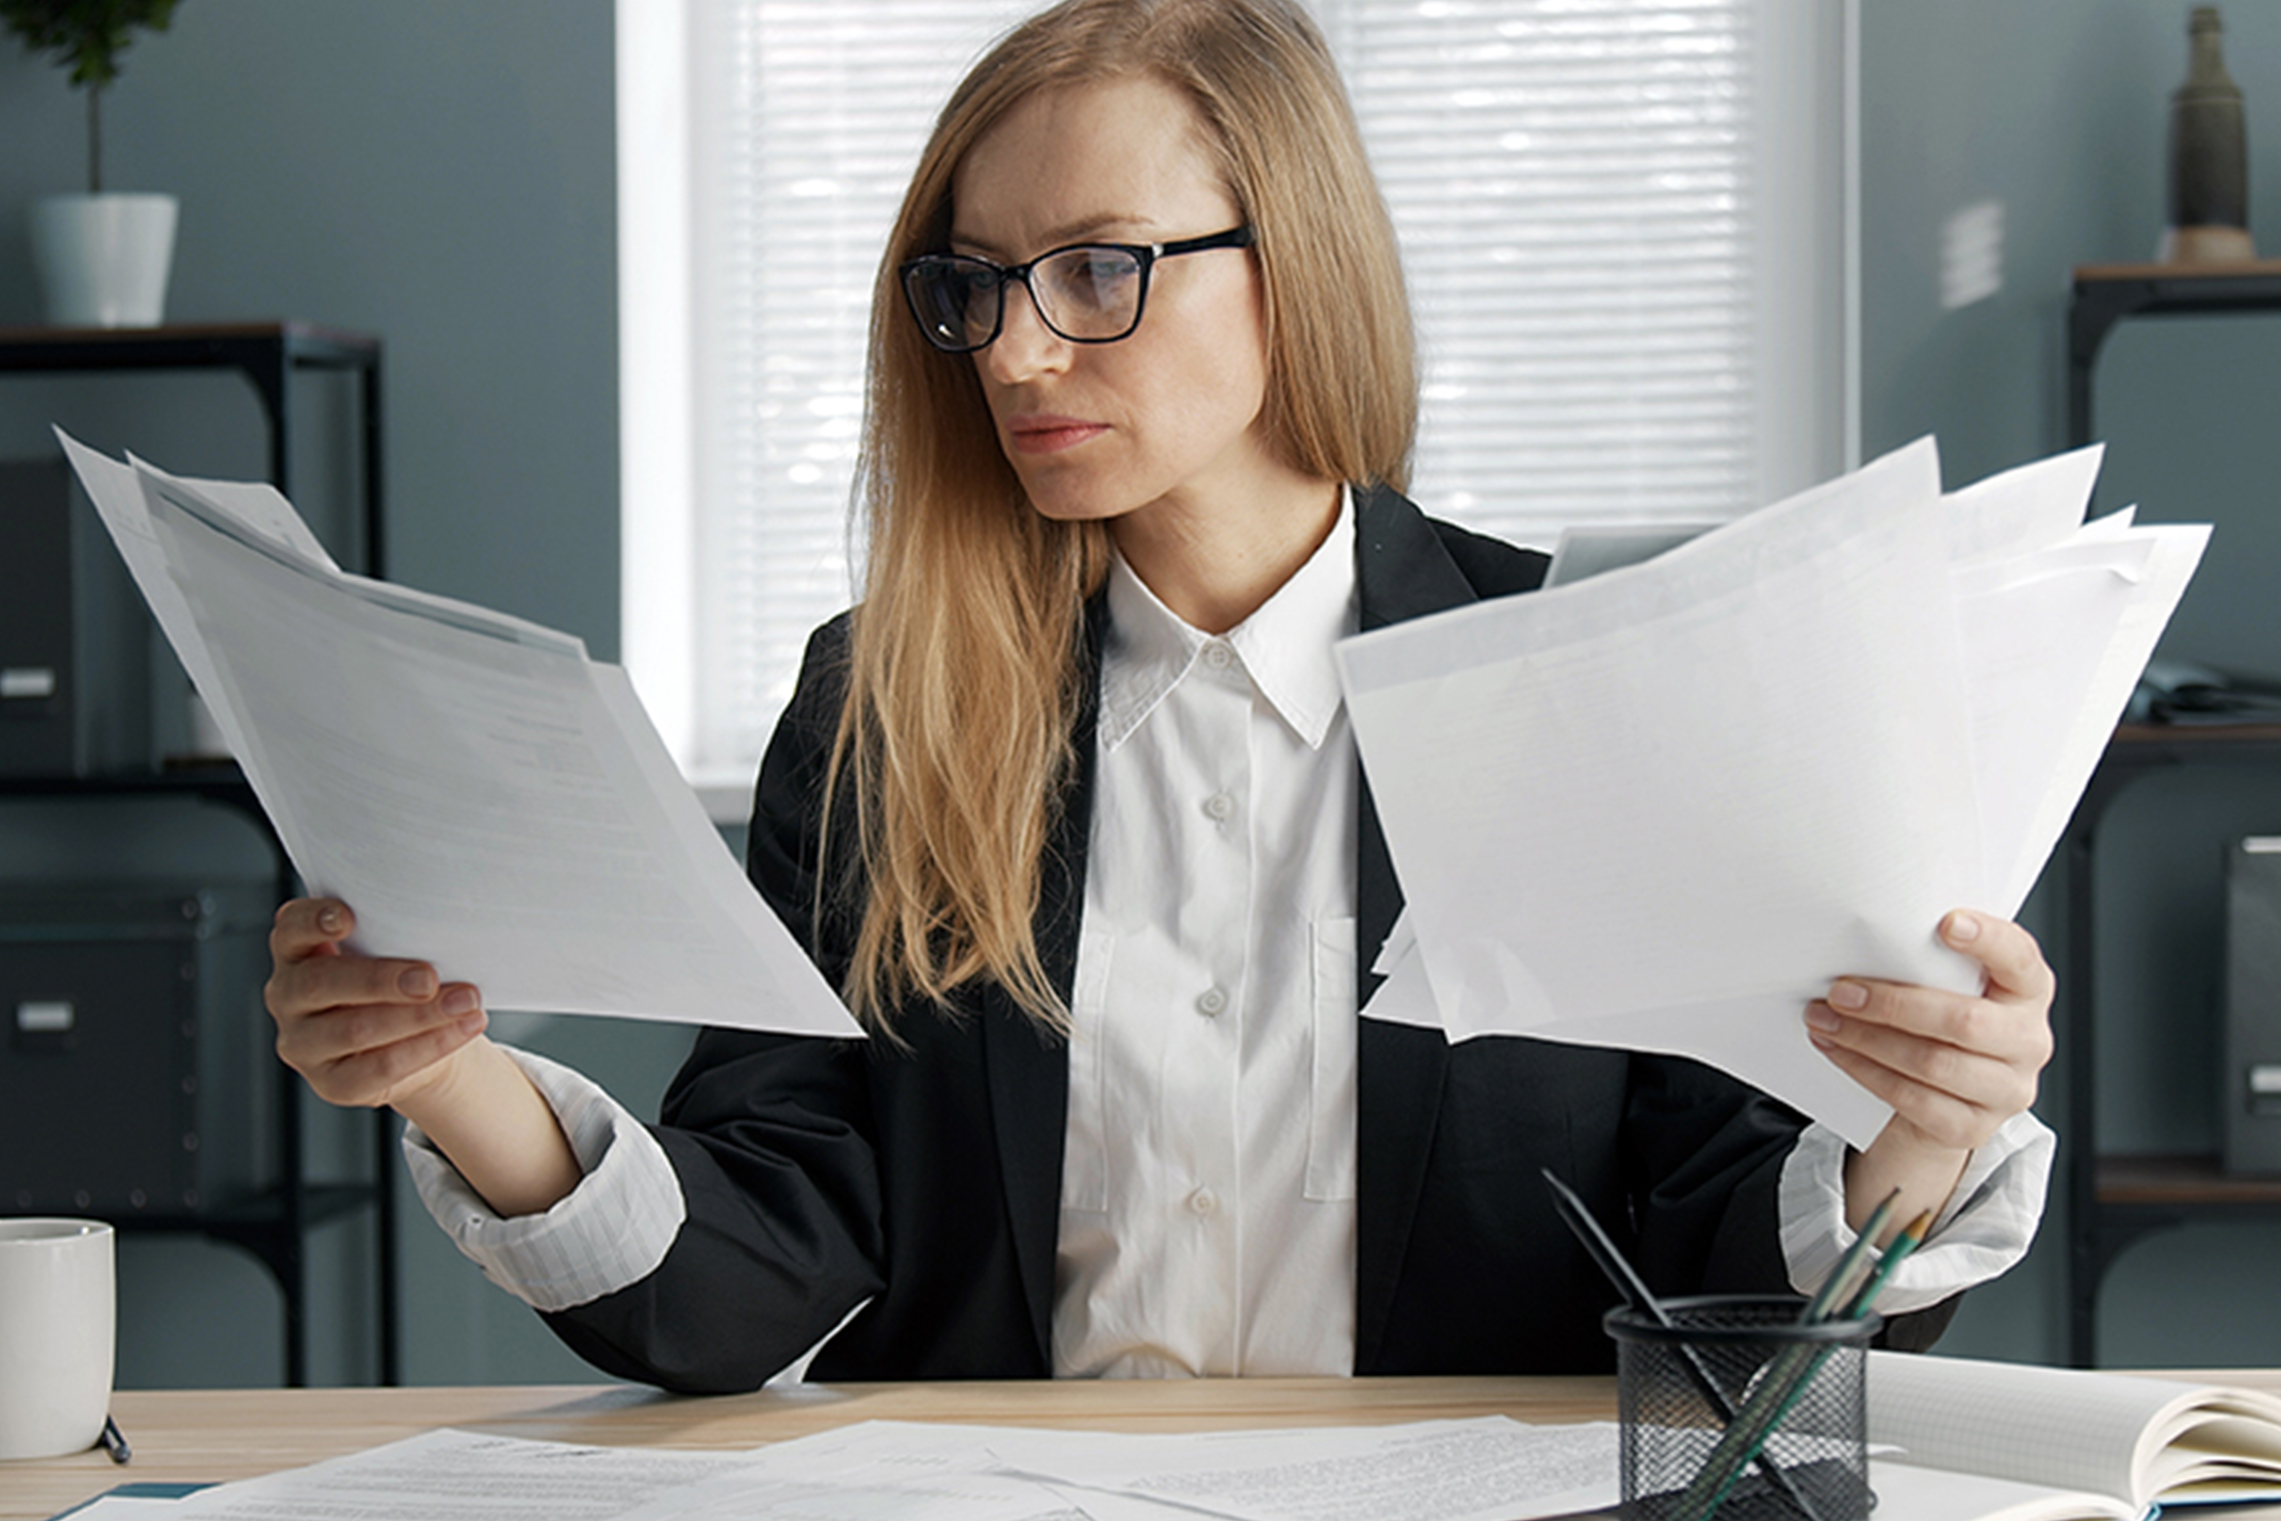 Concentrated blond business woman sitting at office desk holding heaps of documents, paper reports